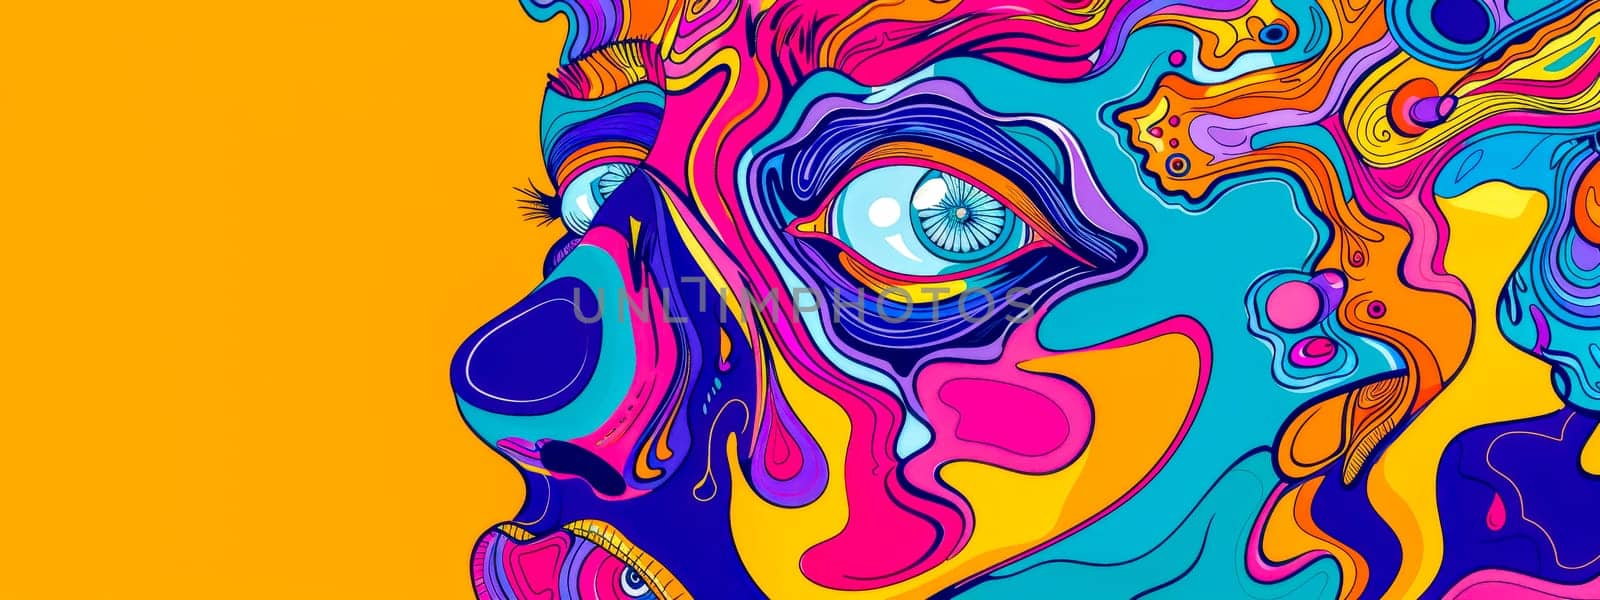 Colorful abstract psychedelic art with human eye by Edophoto